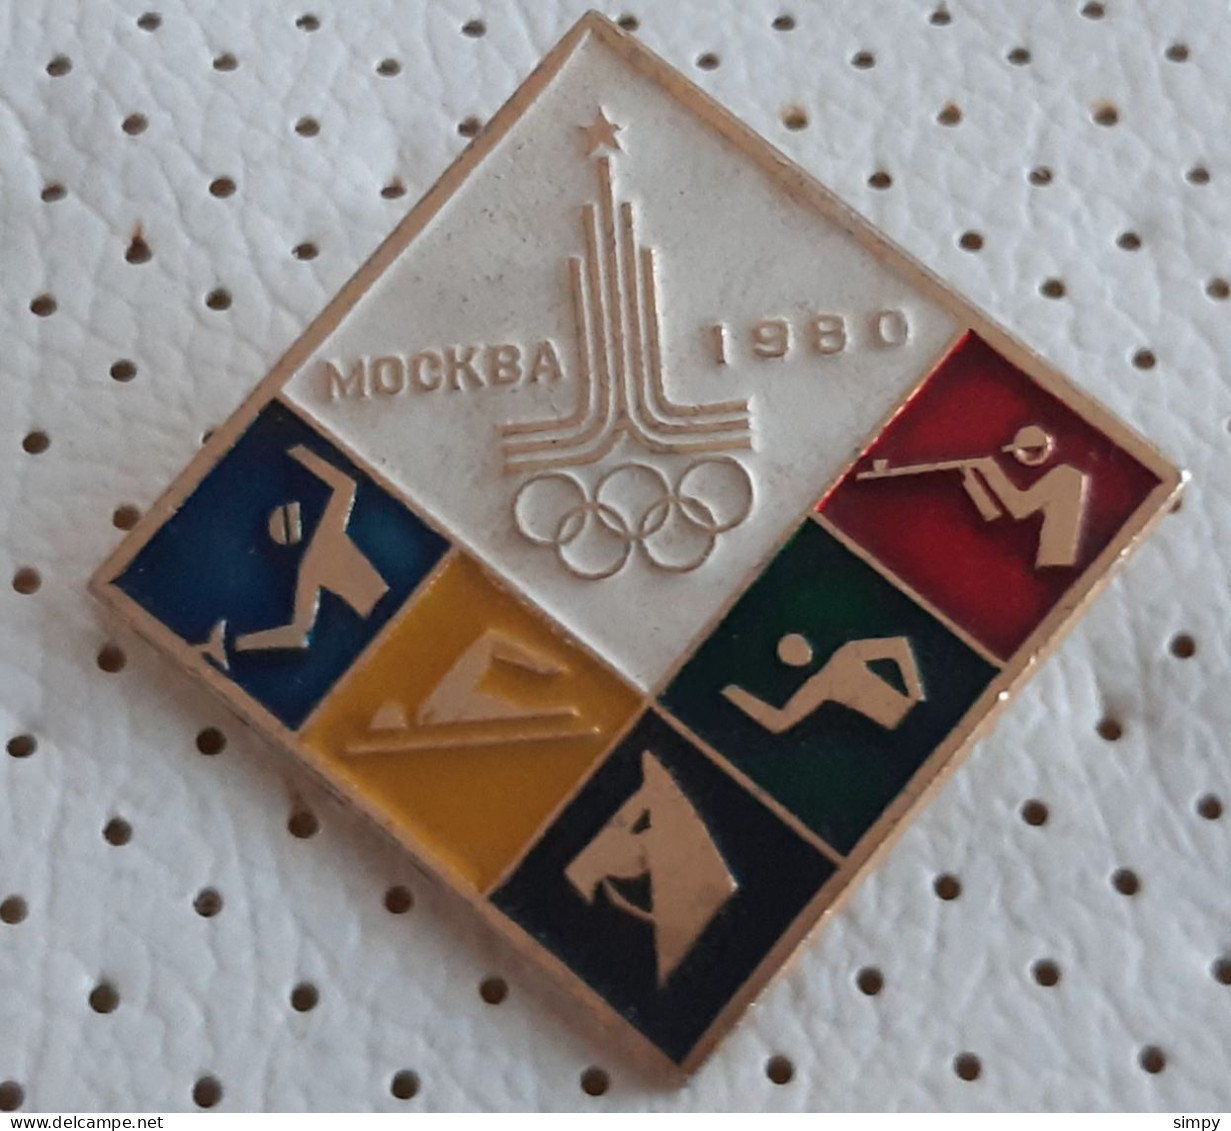 Fencing Swiming Shooting Equitation Olympic Games Moscow 1980 Pin - Pesistica